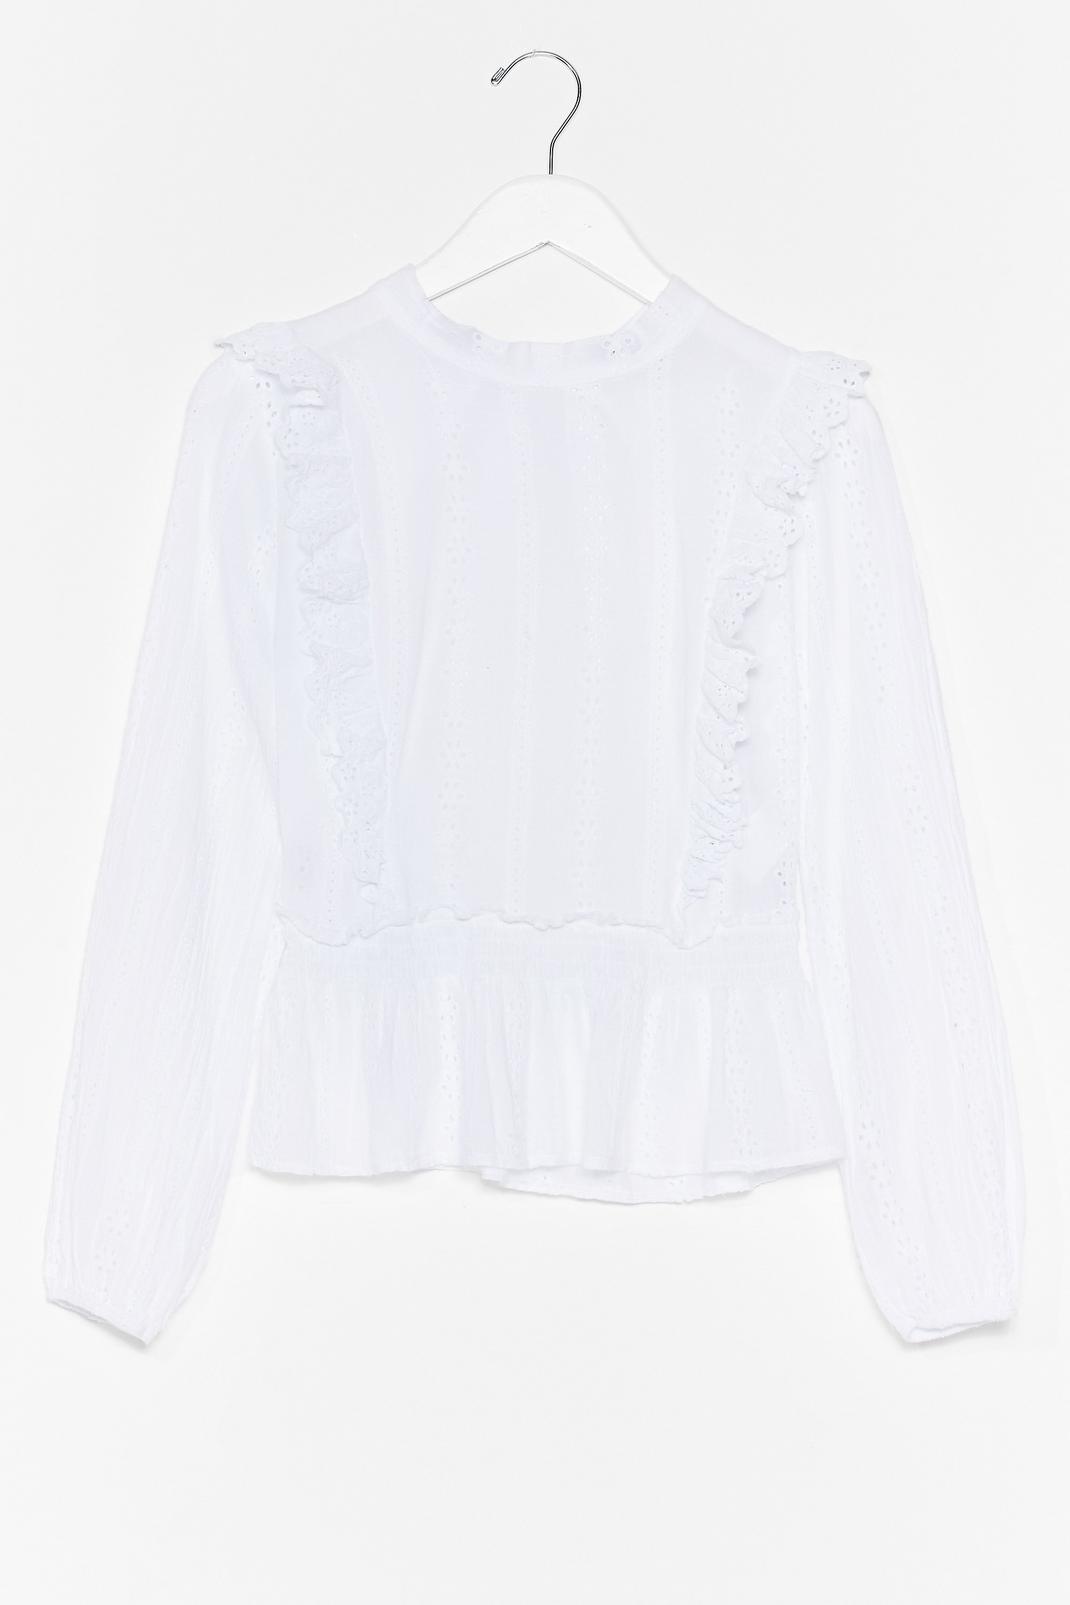 Blouse en broderie anglaise ouverte au dos Good Morning England, White image number 1